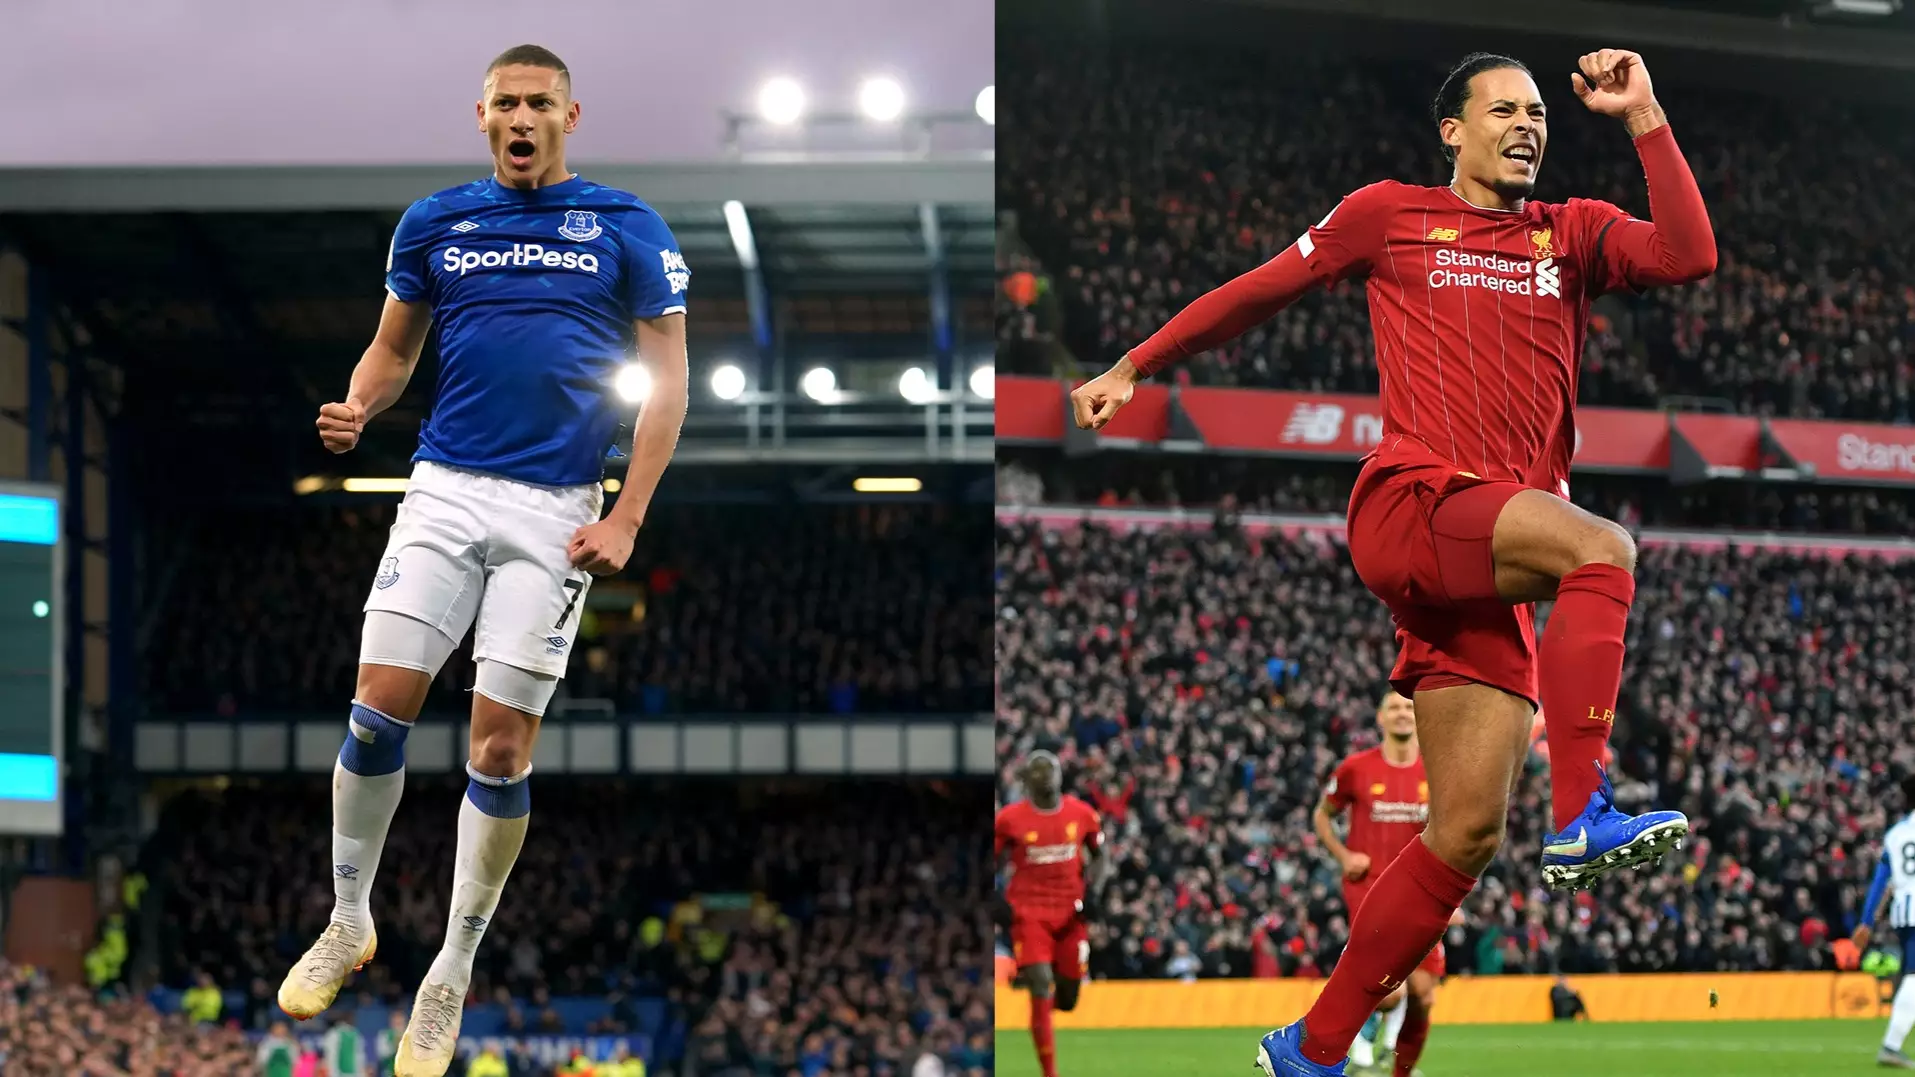 Merseyside Derby Preview - Liverpool Just 2 Wins From The Title